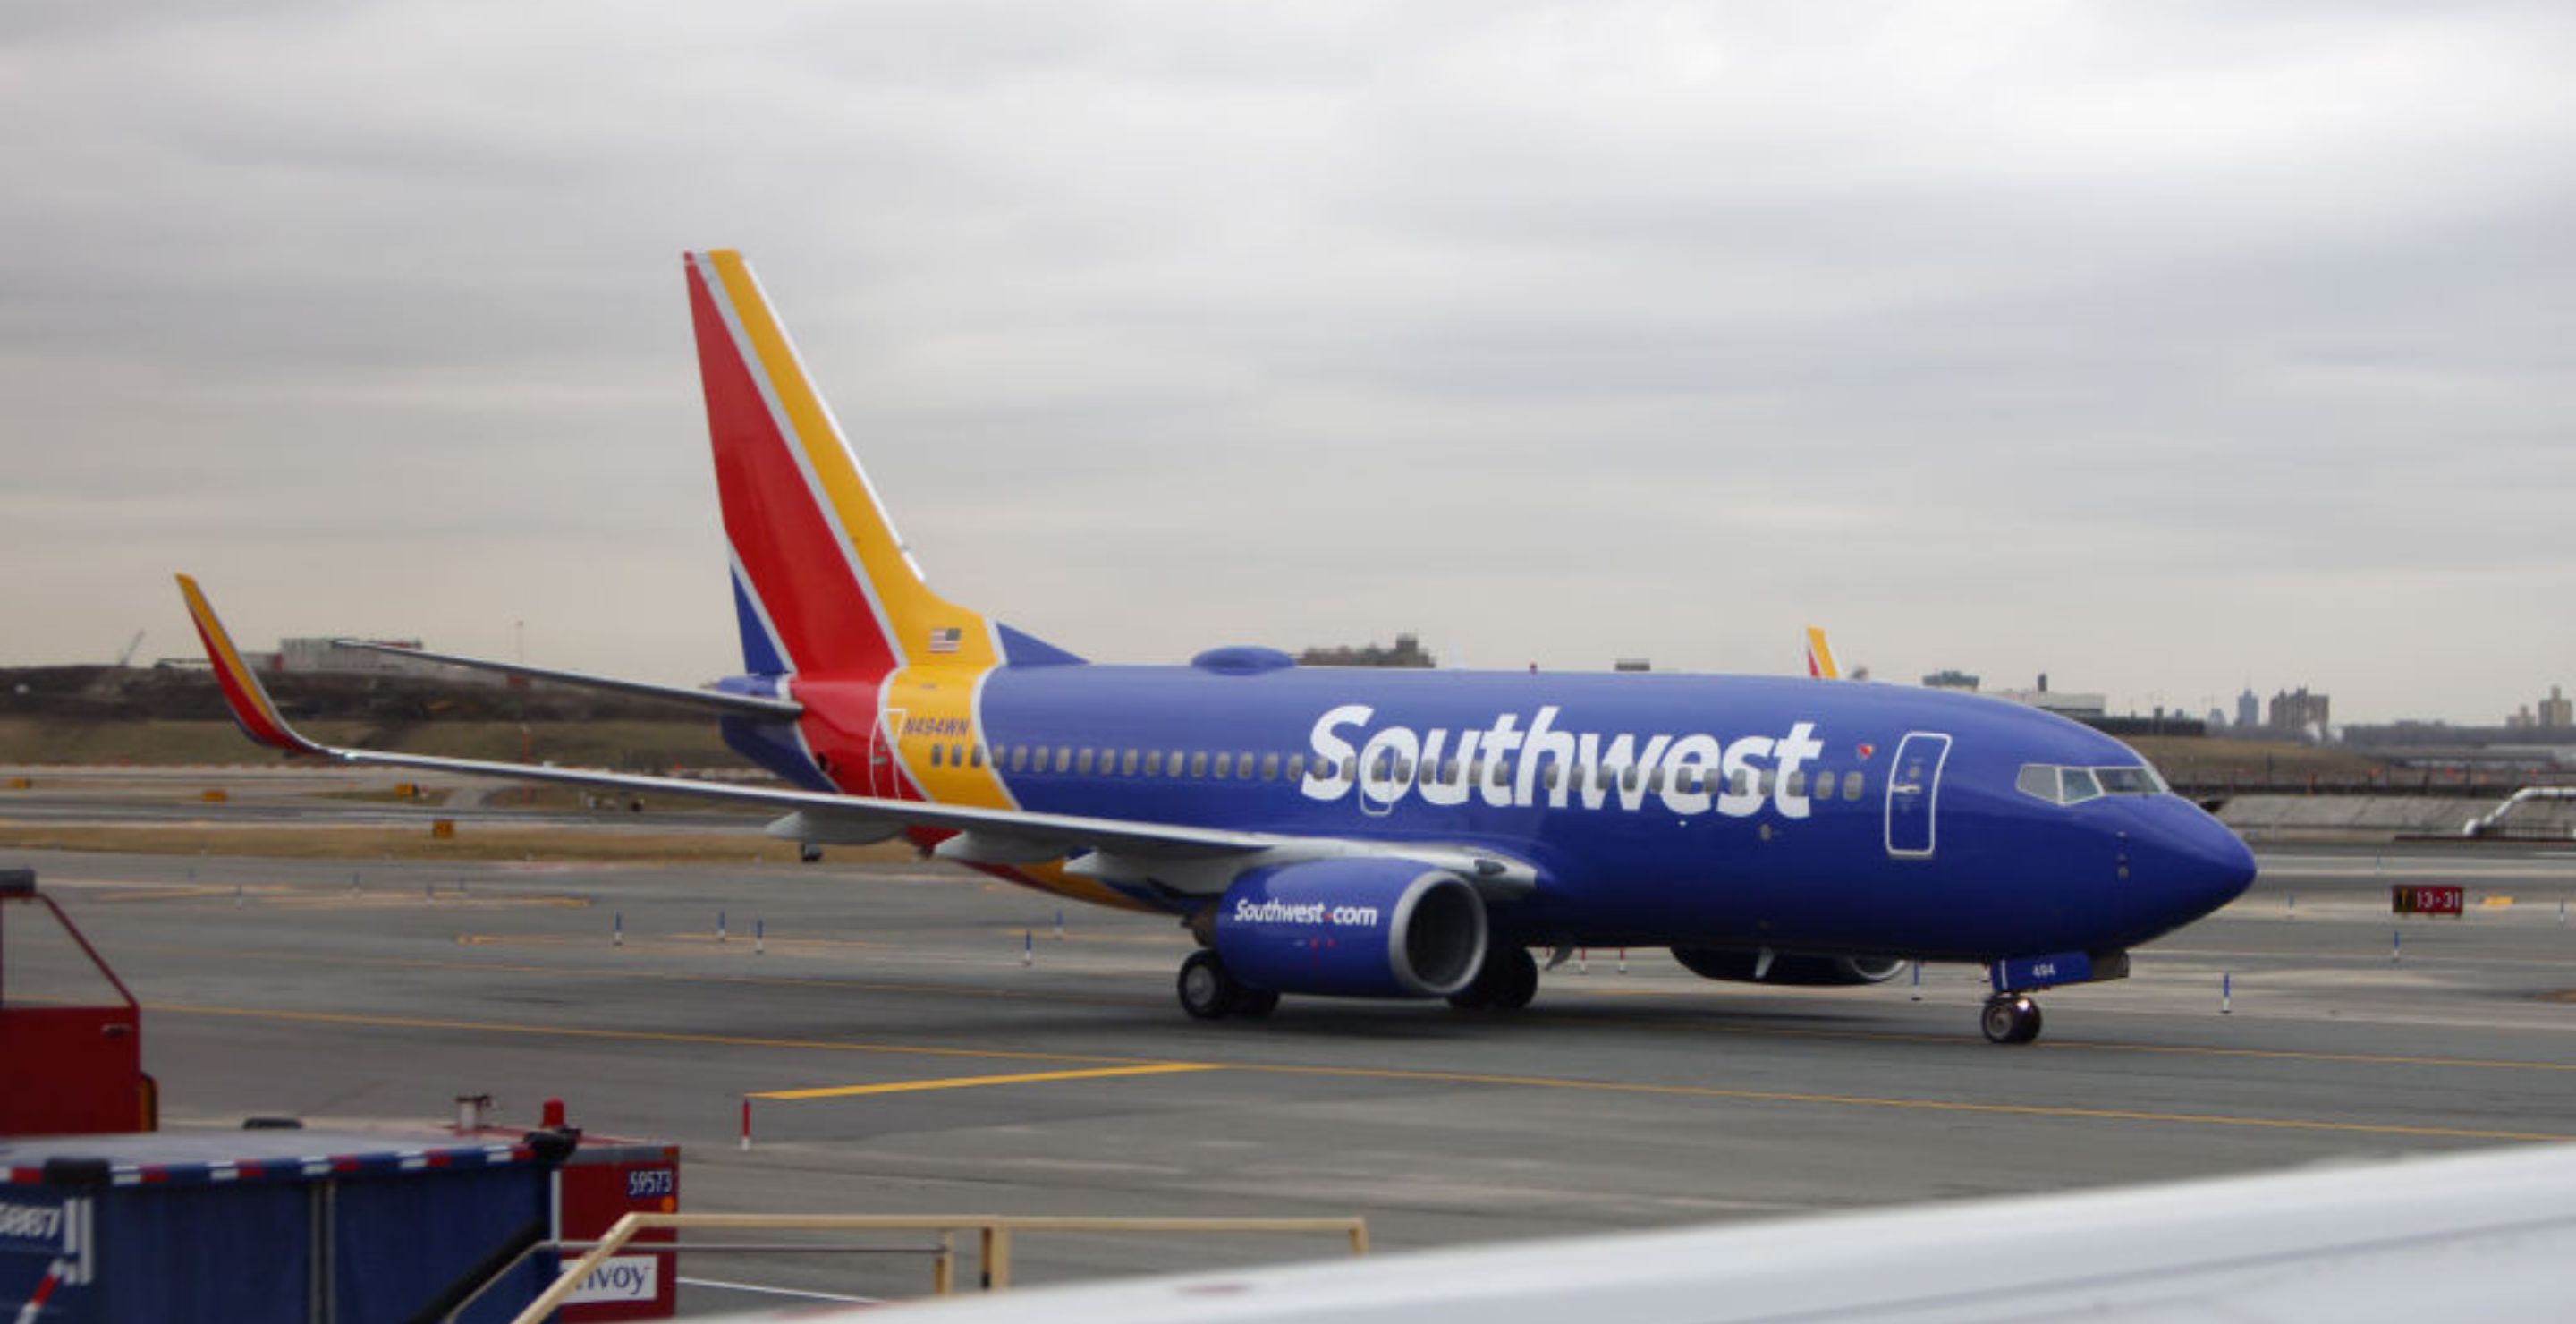 Southwest Under Investigation After Plane Flies Just 150 Feet From The Ground